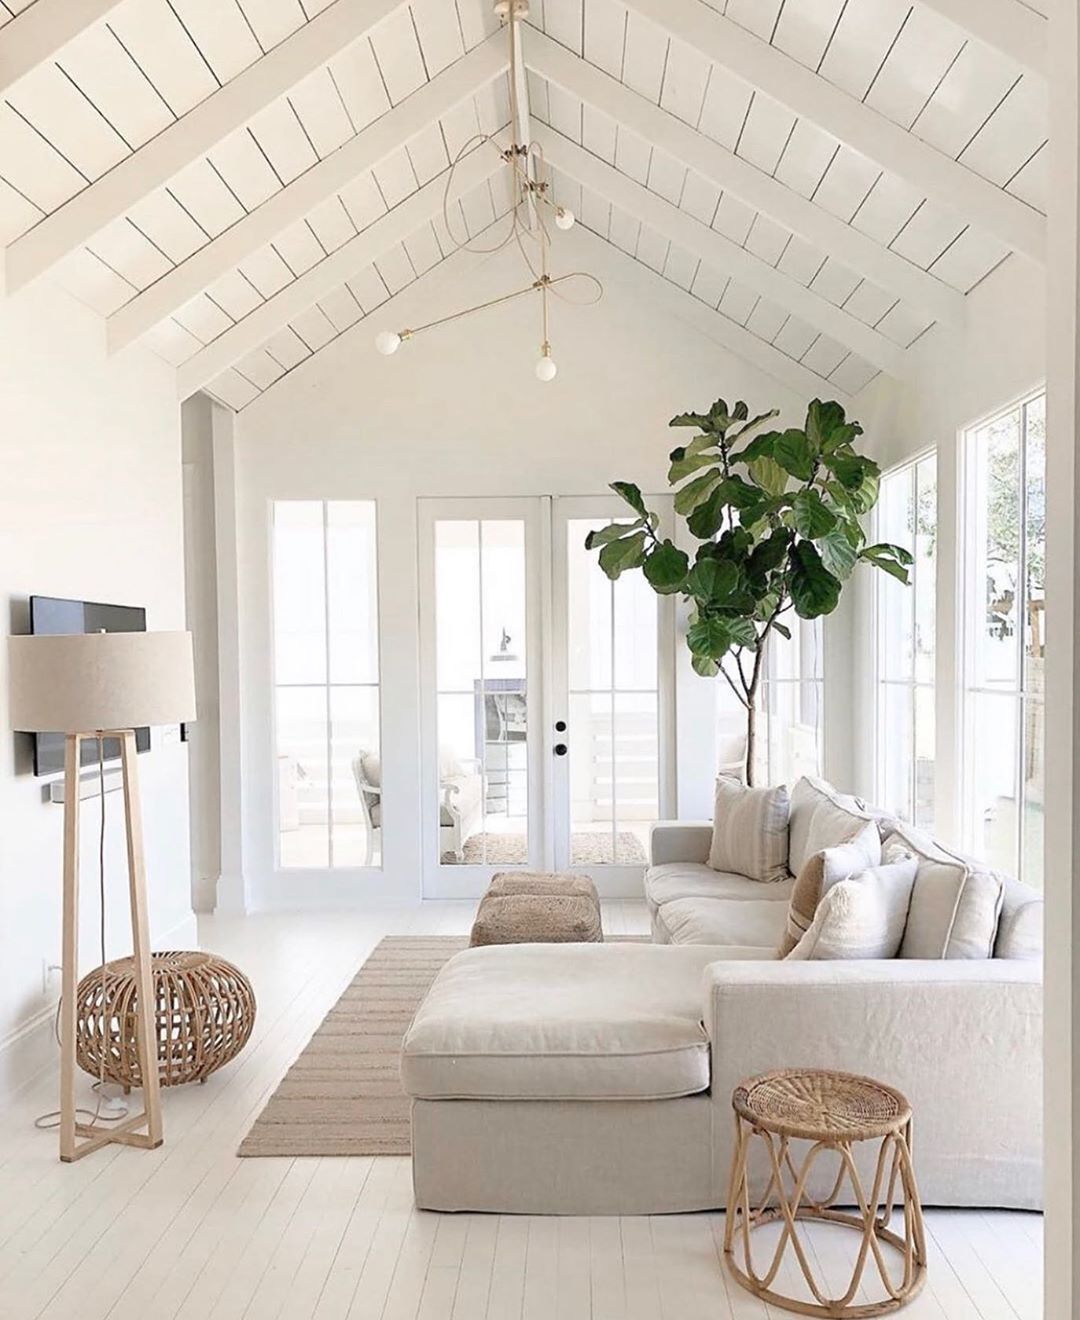 Niña on Instagram: “Seeing this sunroom by @birdsandbobos is getting me SO excited for our four seasons room in the new house!  It’s been so fun to actually…”